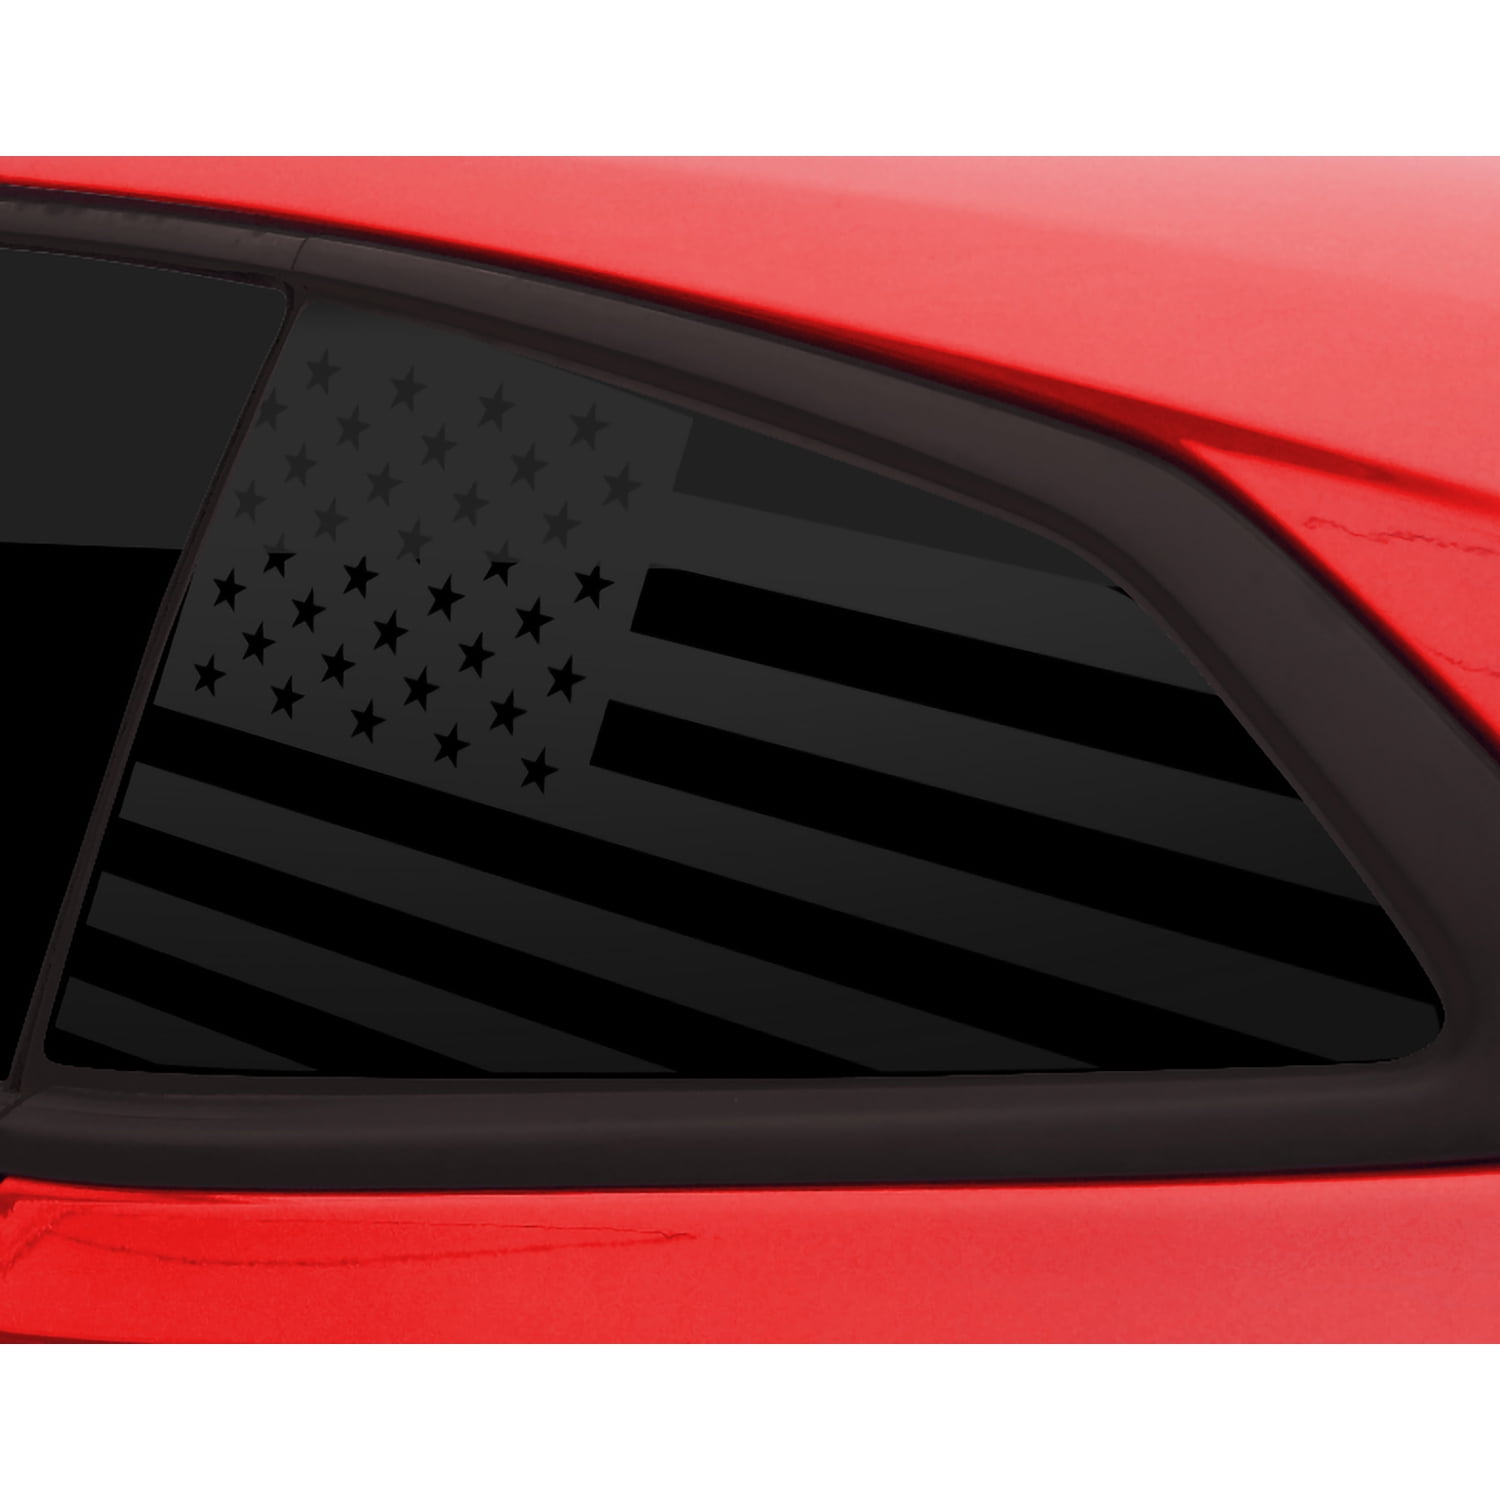 Camaro American Flag Vinyl Mirrored Decals Rear Quarter Panel with installation kit included